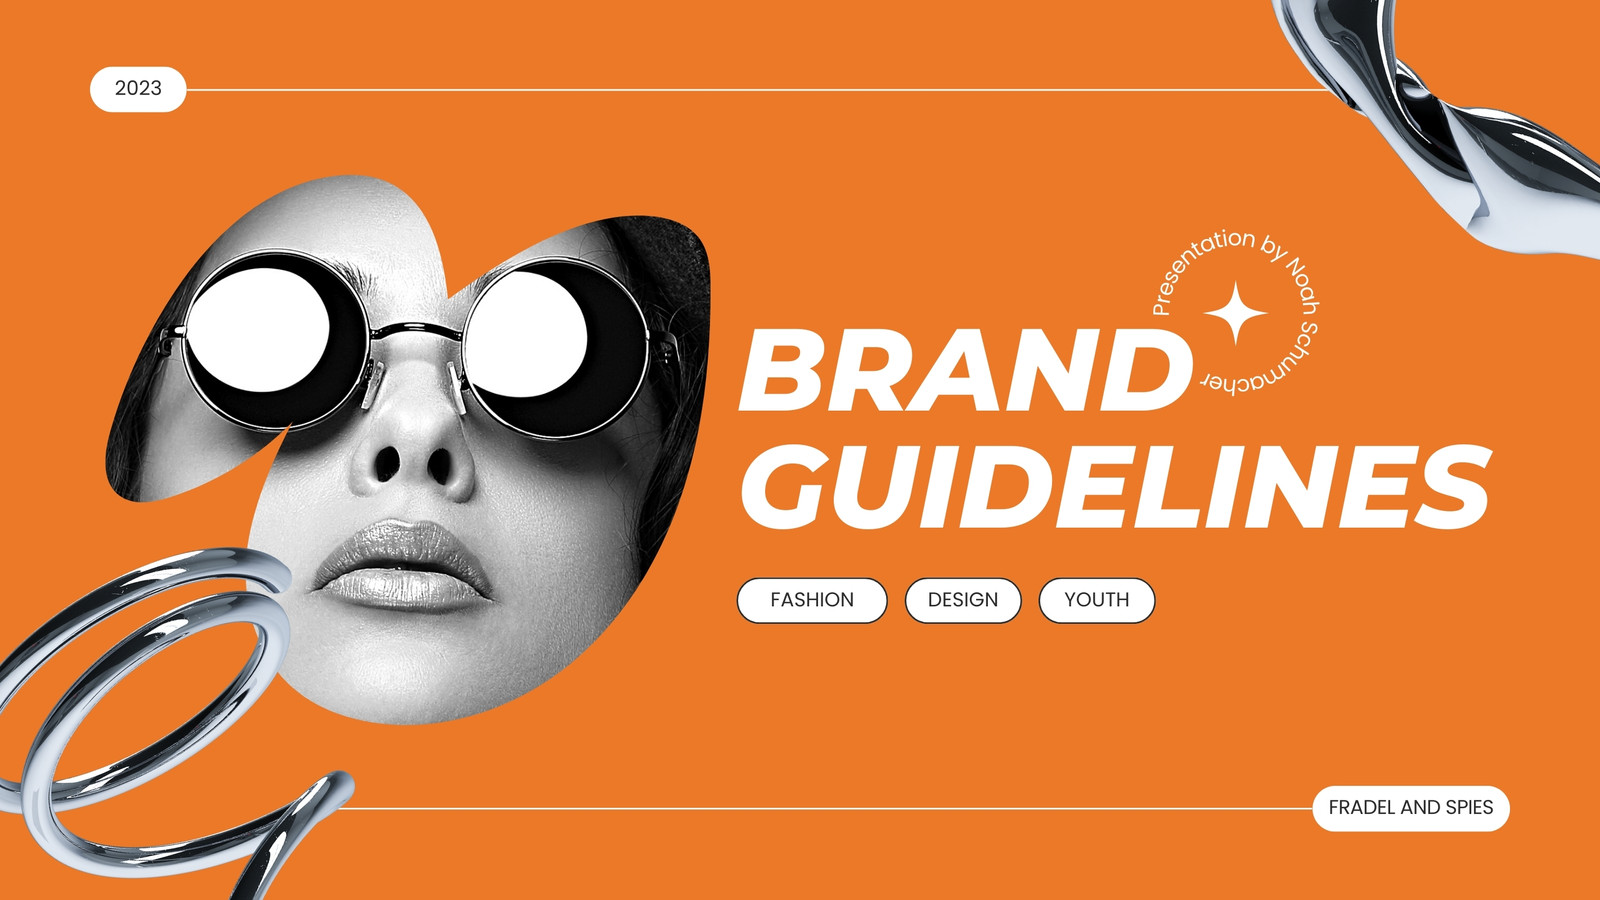 Page 11 - Free customizable brand guidelines presentation templates | Canva